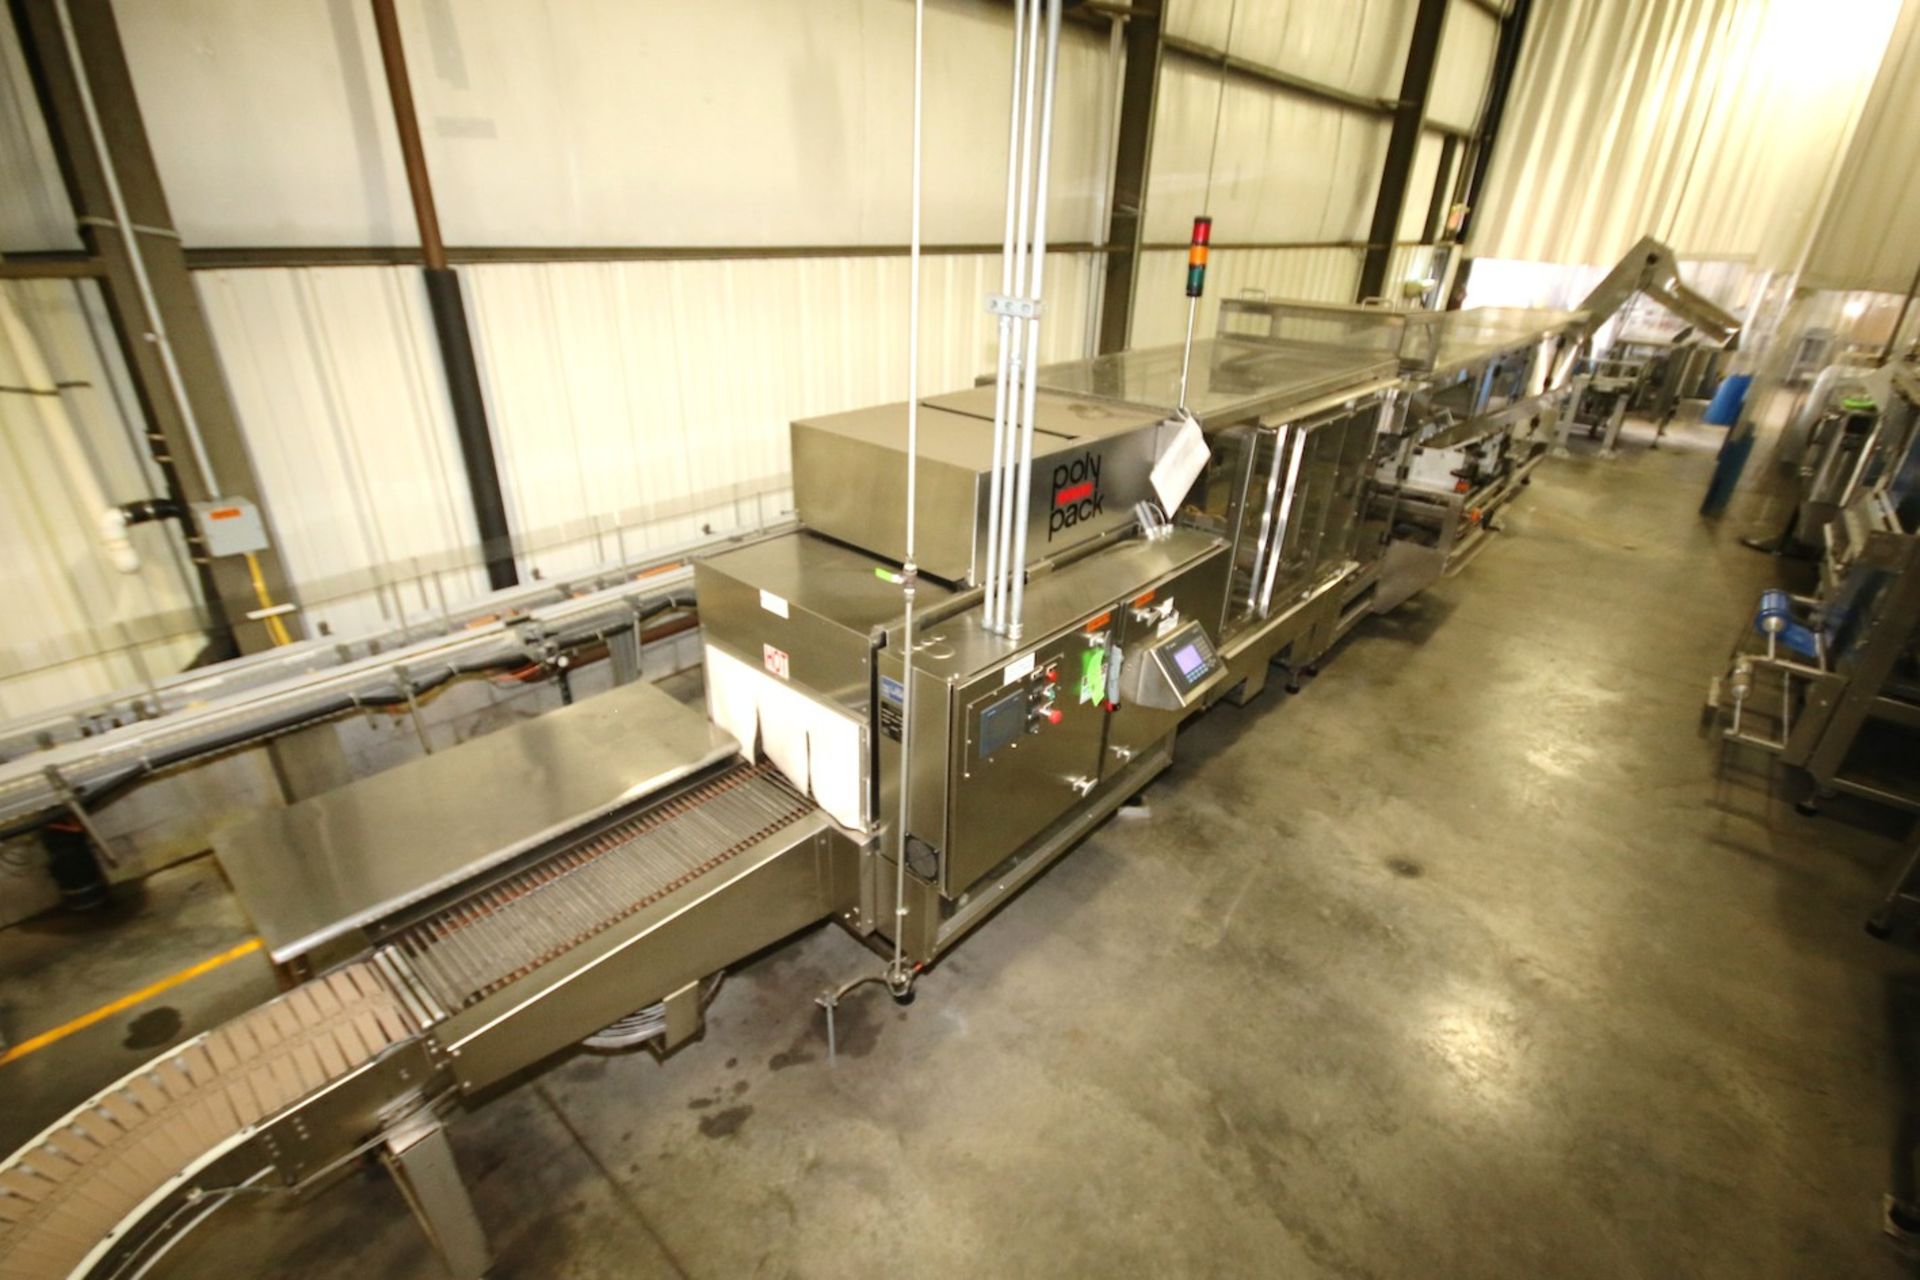 2008 Polypack All S/S Overwrapper/Shrink Wrap Tunnel, Model CFH 16-24-32VL, S/N 3477 (Set-Up to Ru